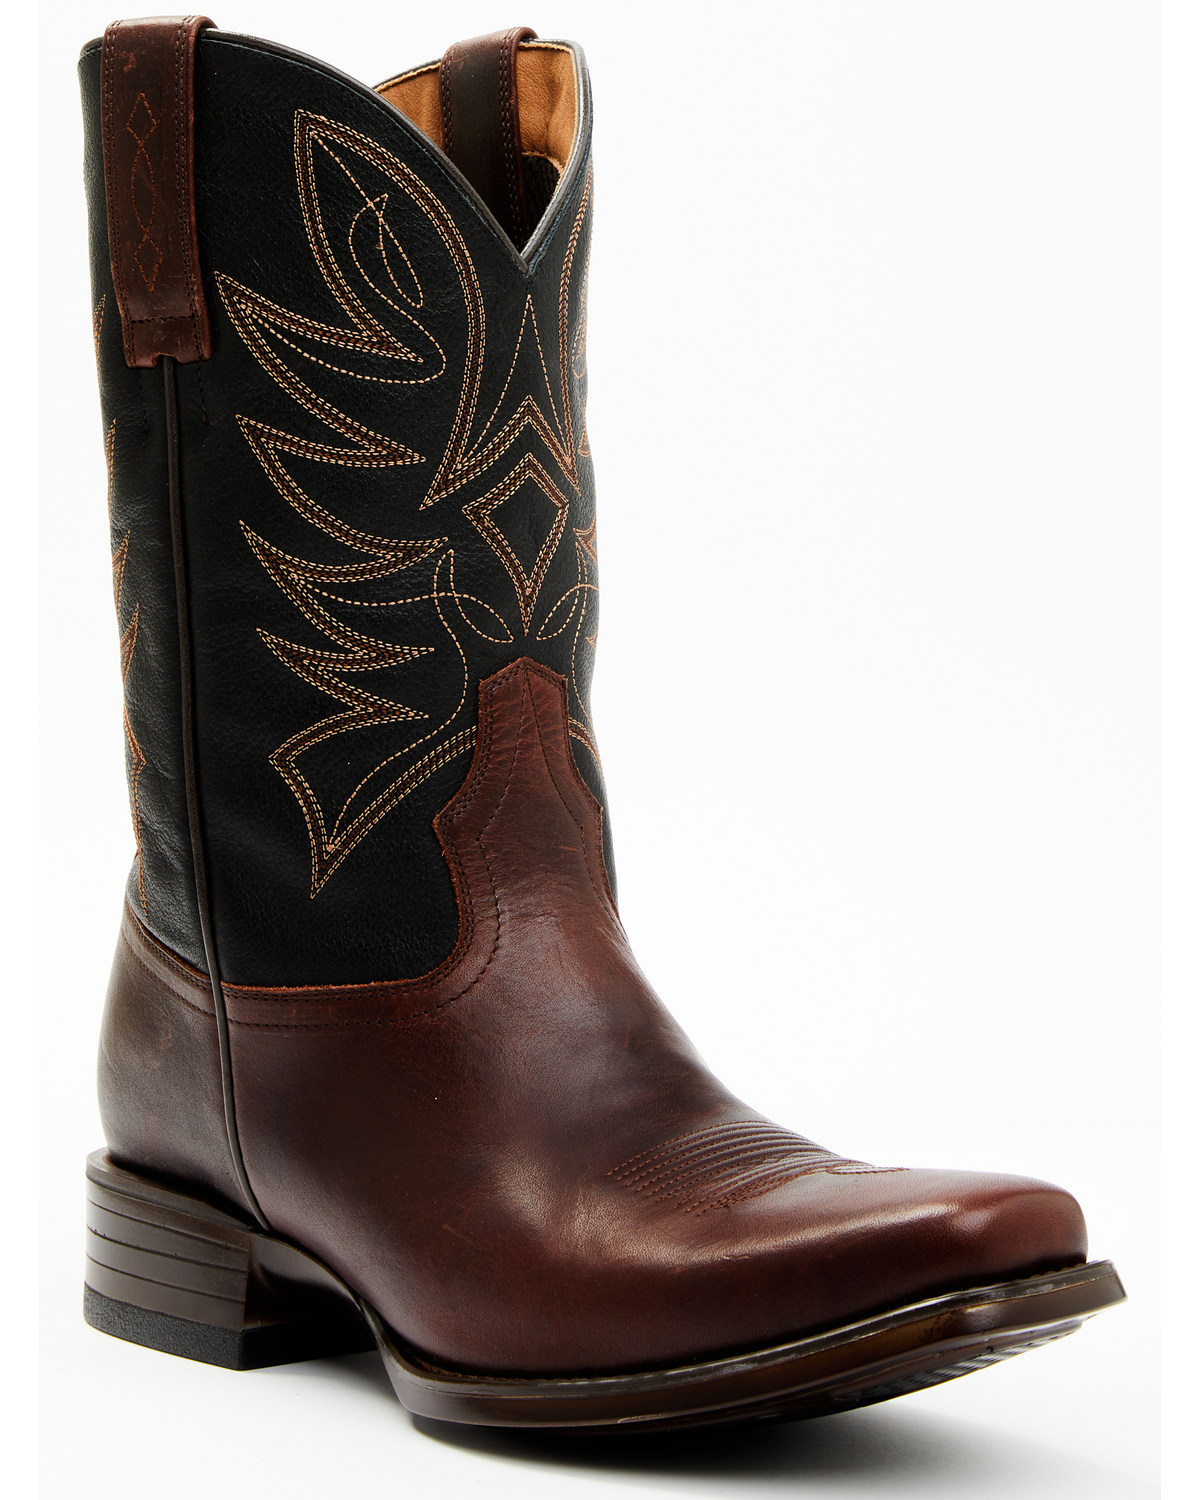 Cody James Men's Hoverfly Western Performance Boots - Square Toe